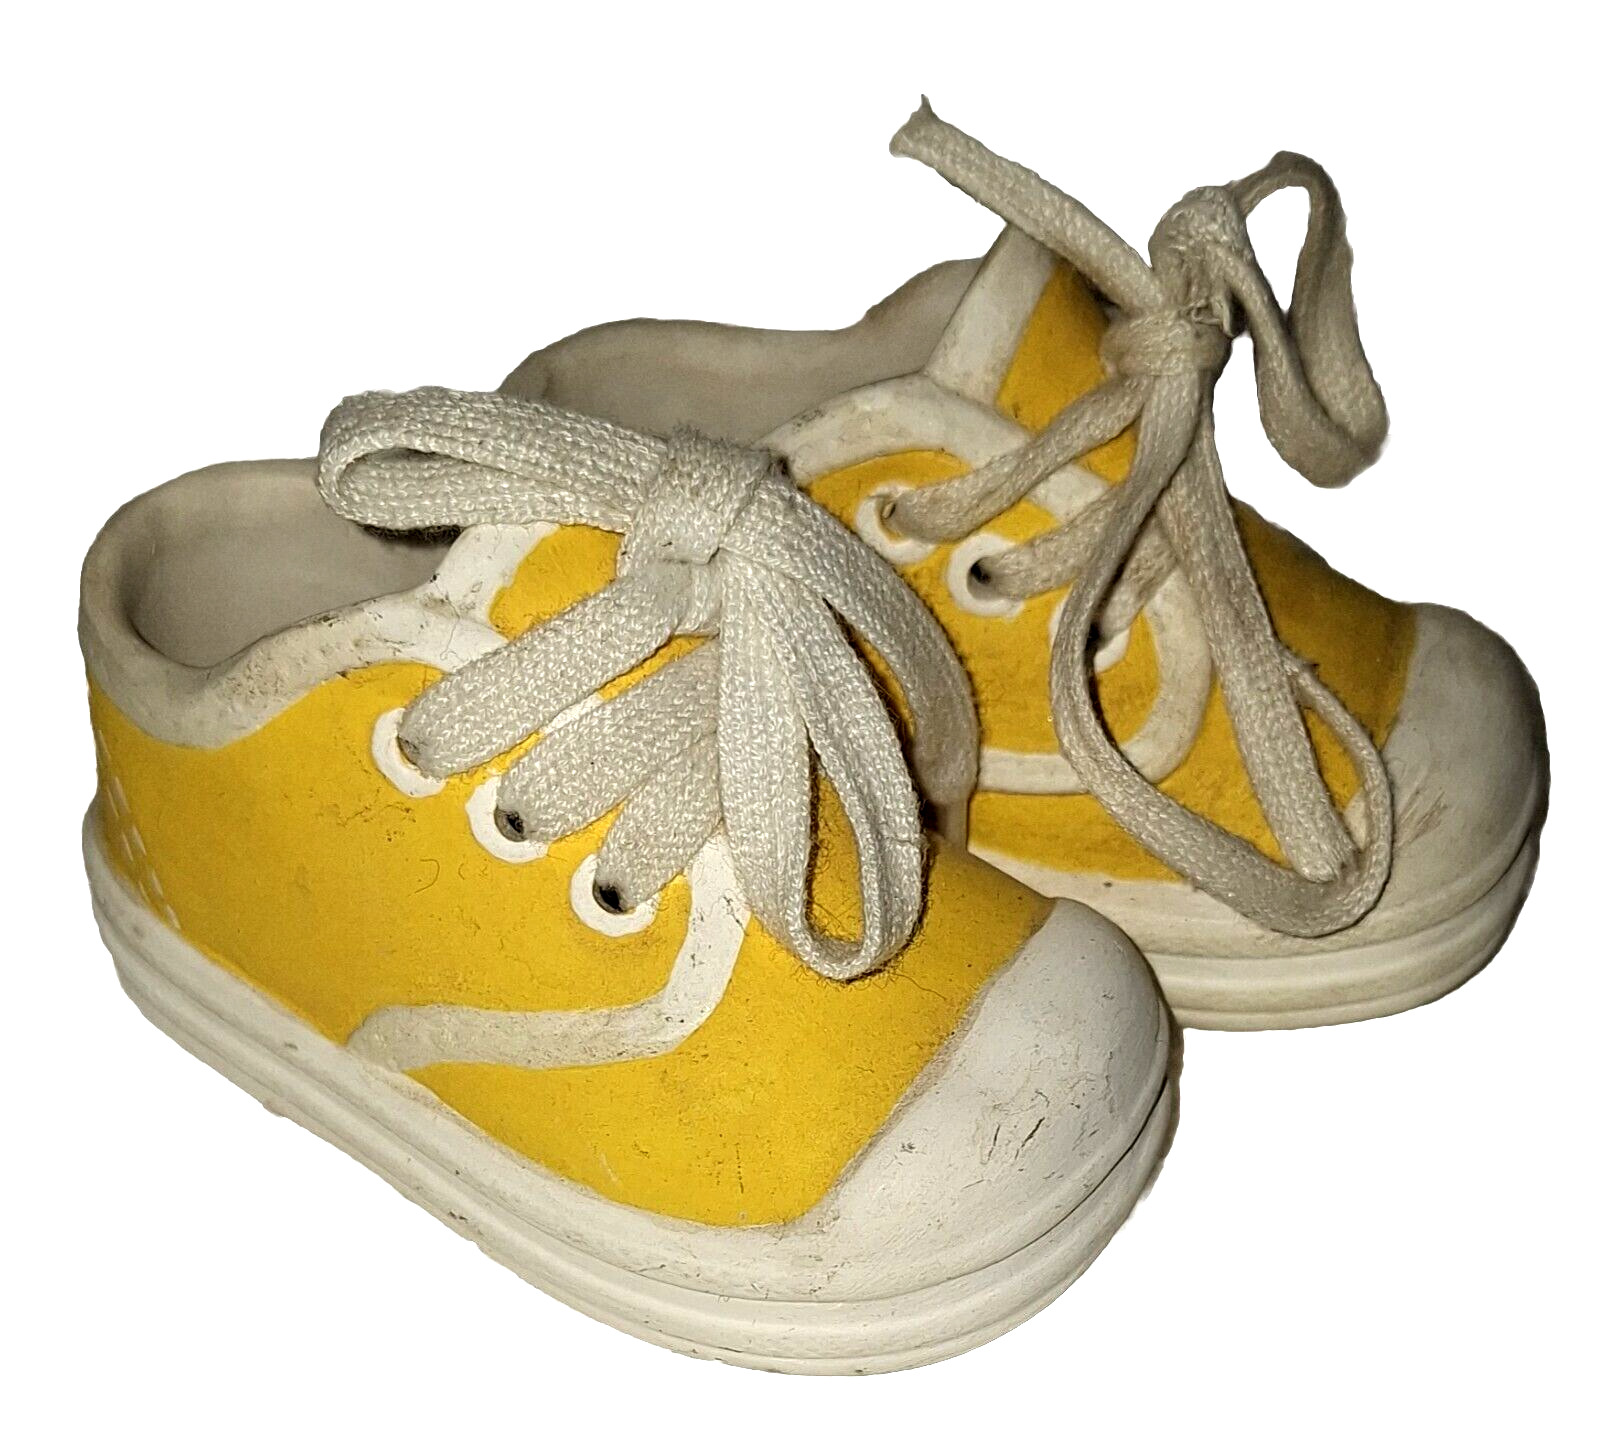 VINTAGE YELLOW AND WHITE CERAMIC BABY SHOES WITH OWN REAL SHOESTRING PLANTERS